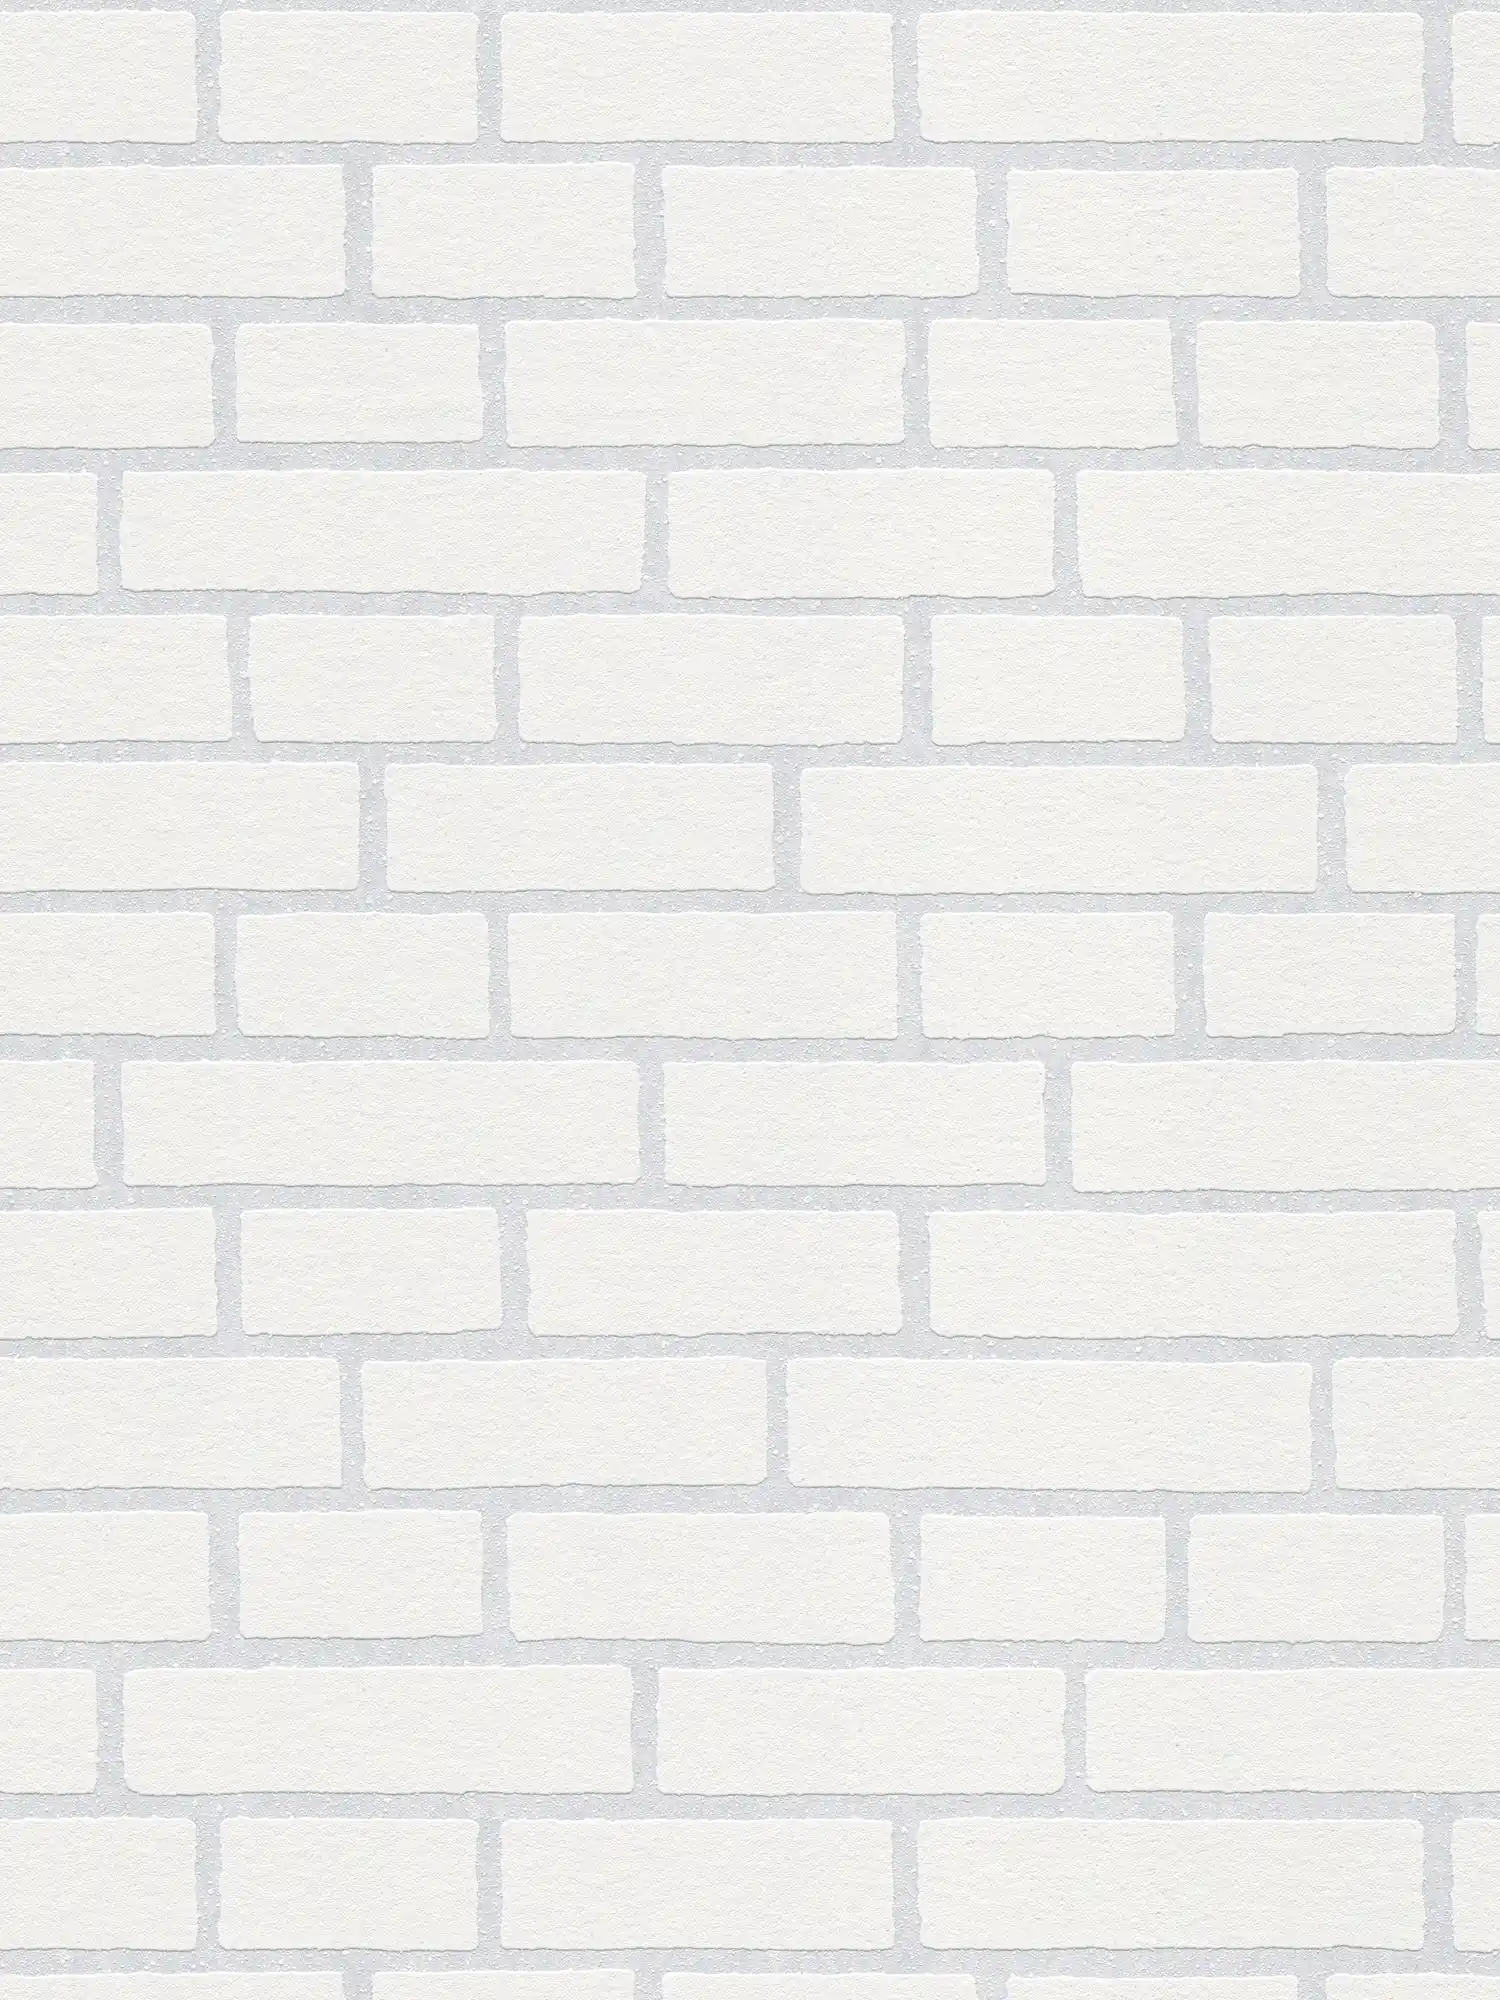 Masonry wallpaper to paint over, with 3D effect - Paintable, White
